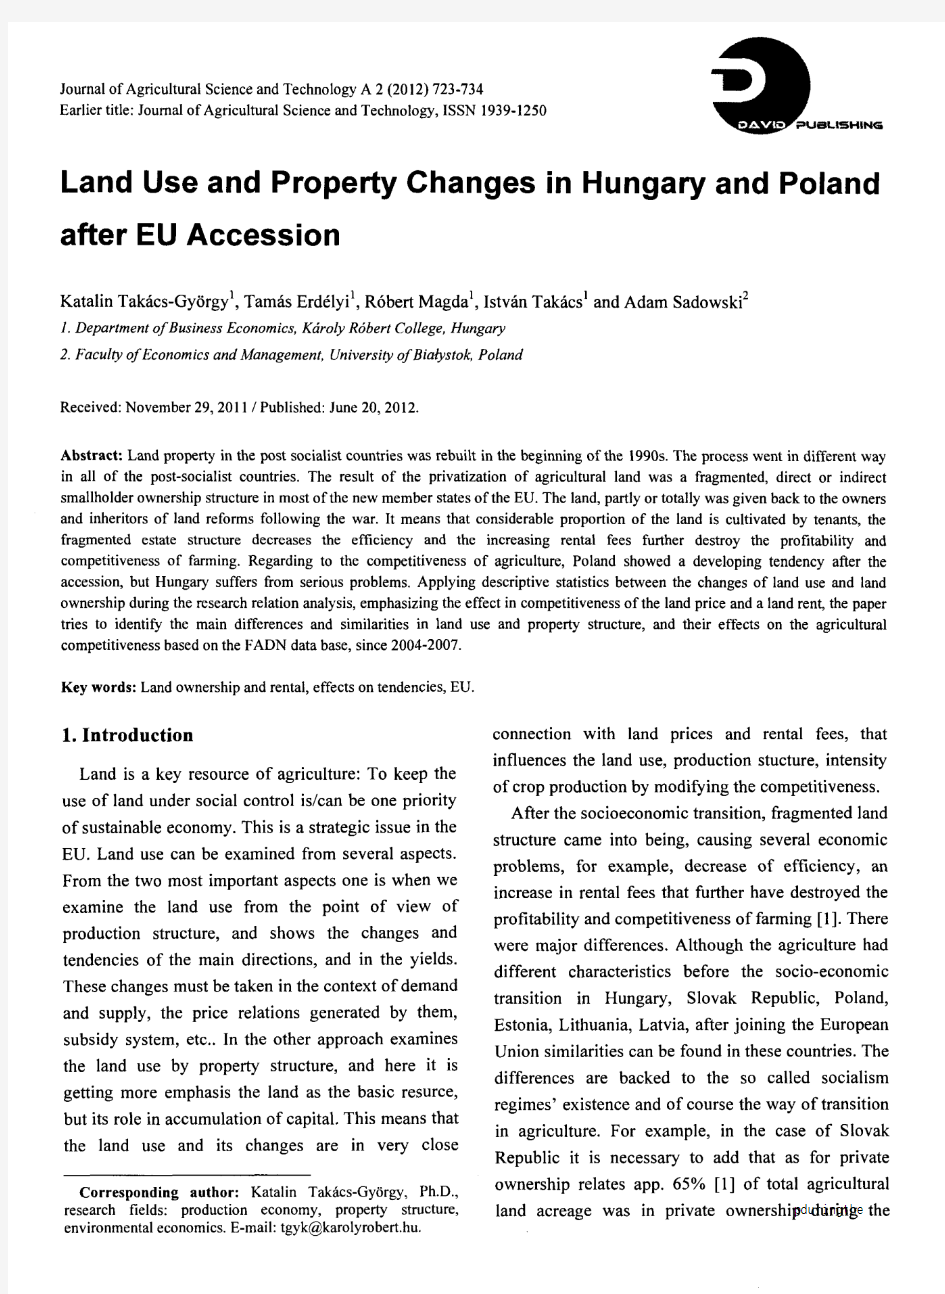 Land Use and Property Changes in Hungary and Poland after EU Accession